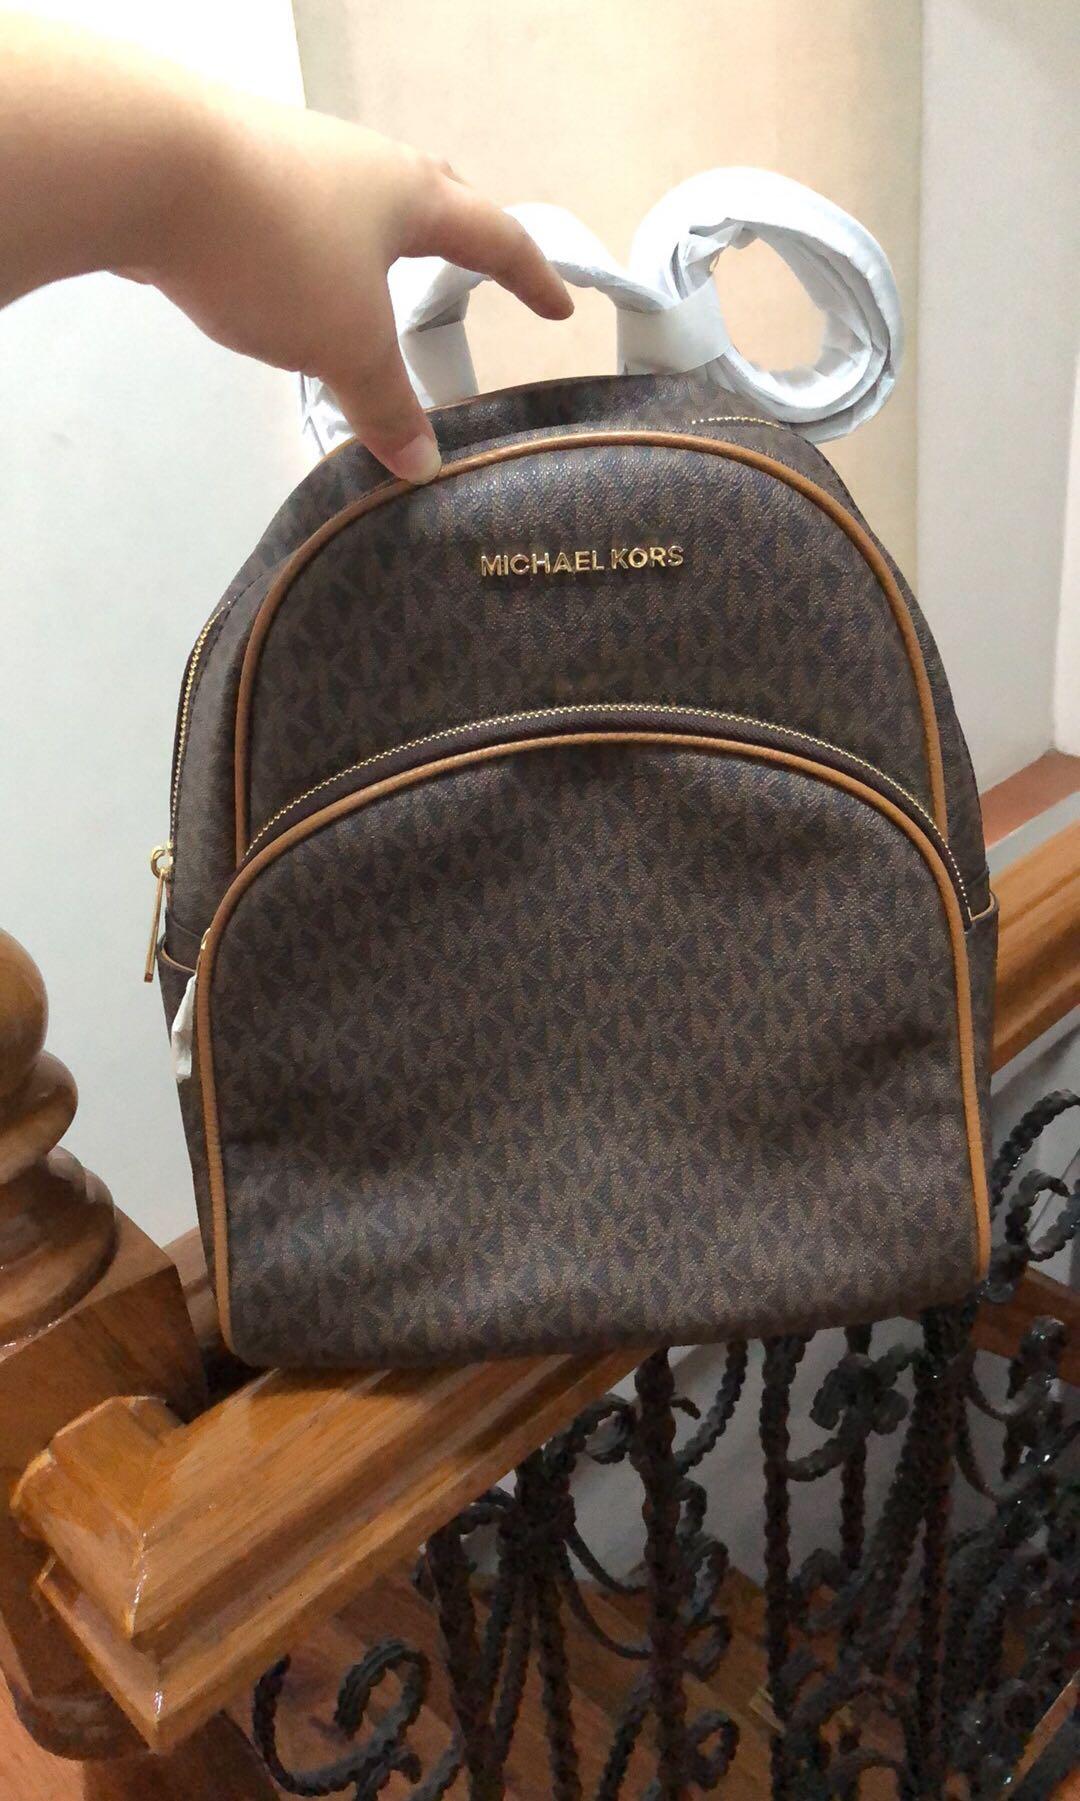 michael kors abbey backpack price